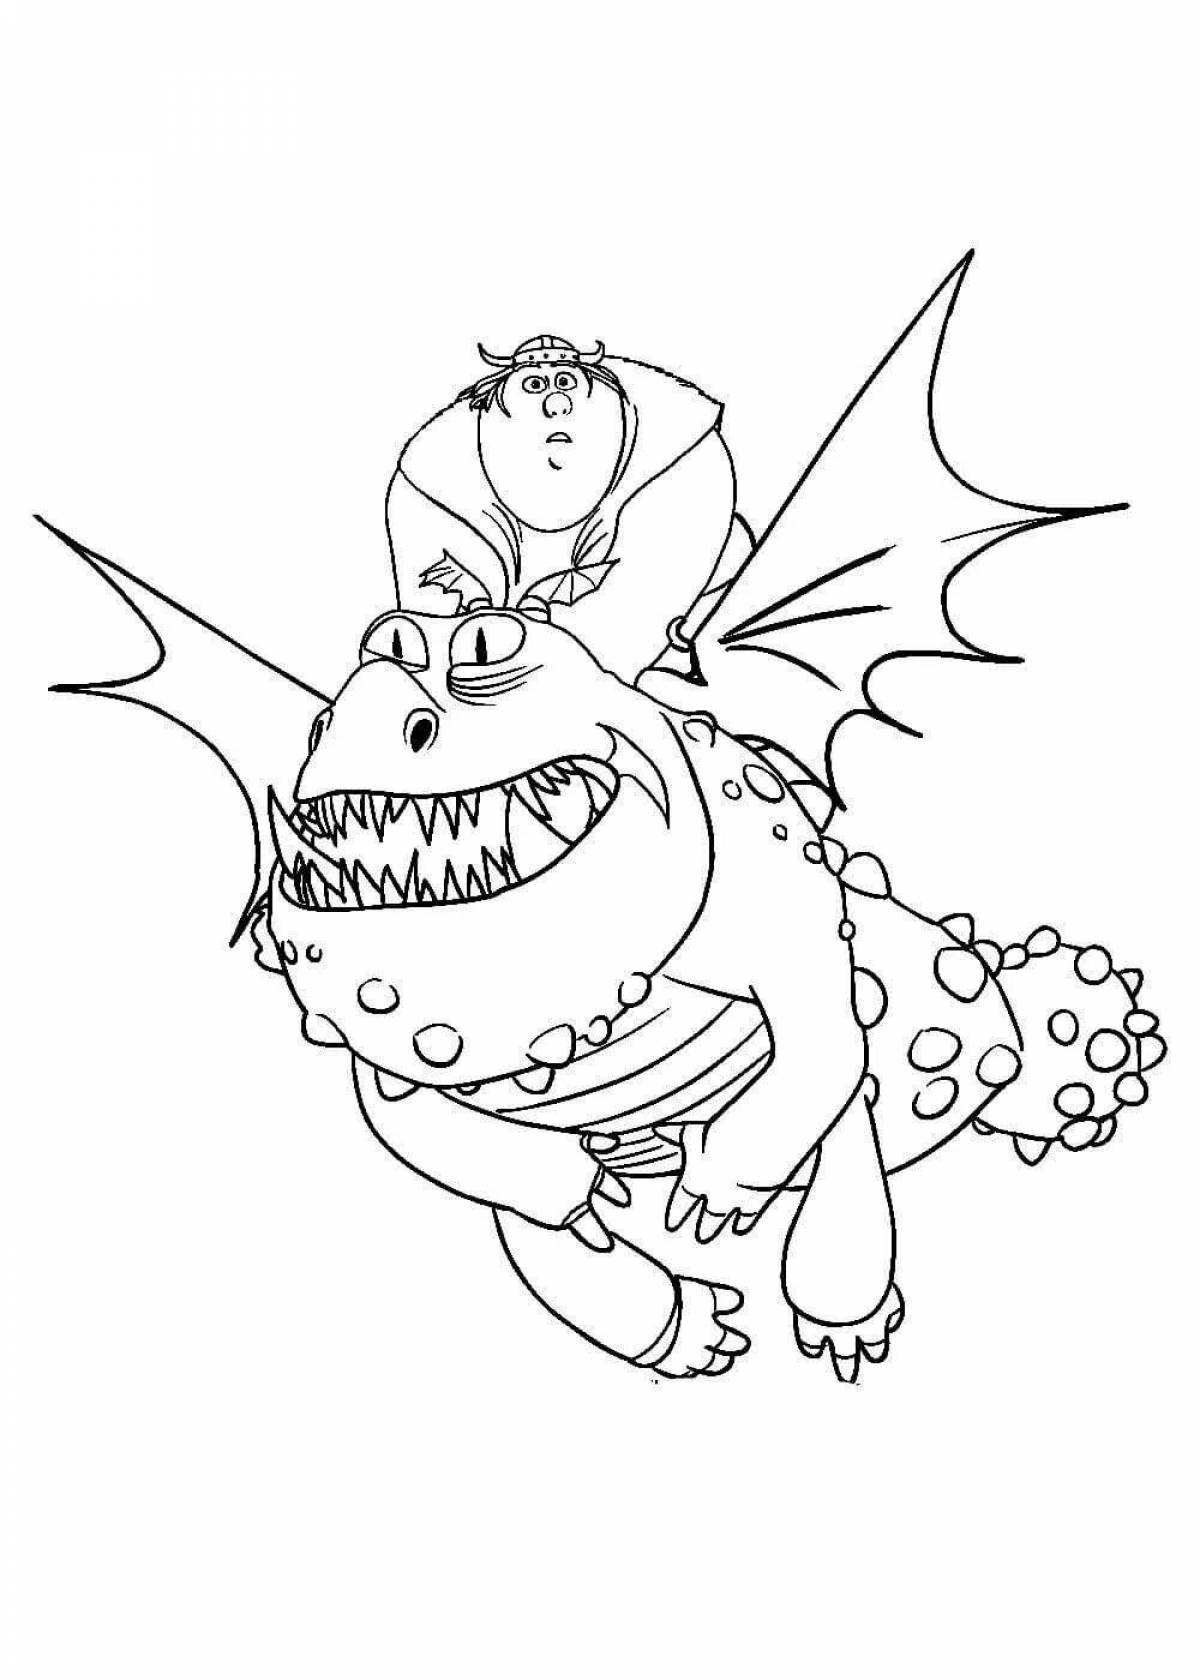 Adorable coloring book to train your dragon